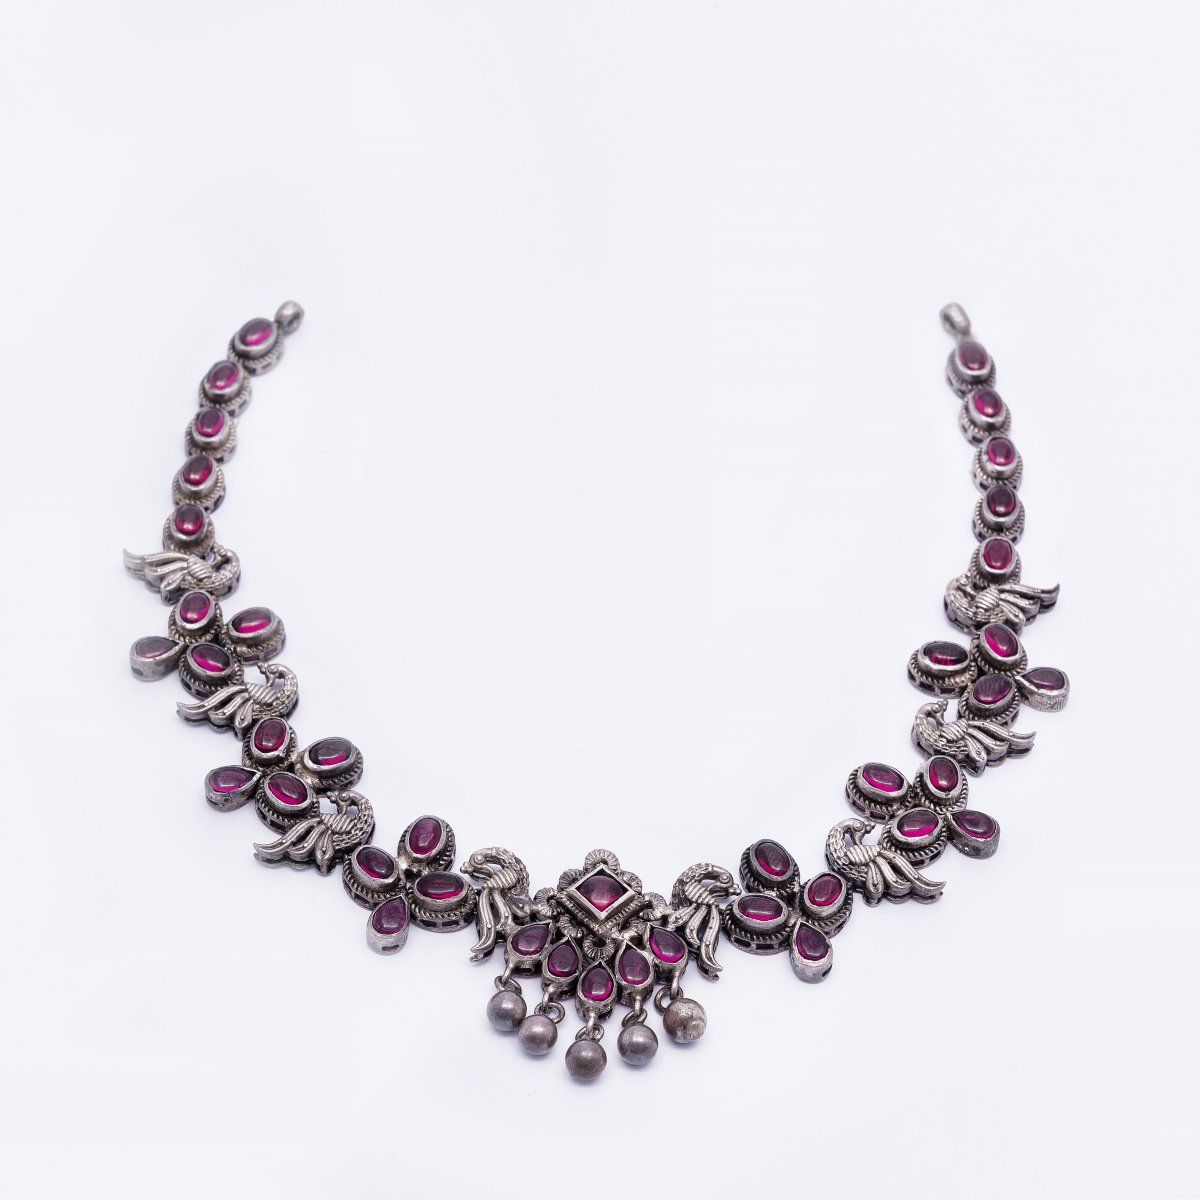 92.5 SILVER SOUTH INDIAN TRADITIONAL NECKLACE FOR WOMEN 